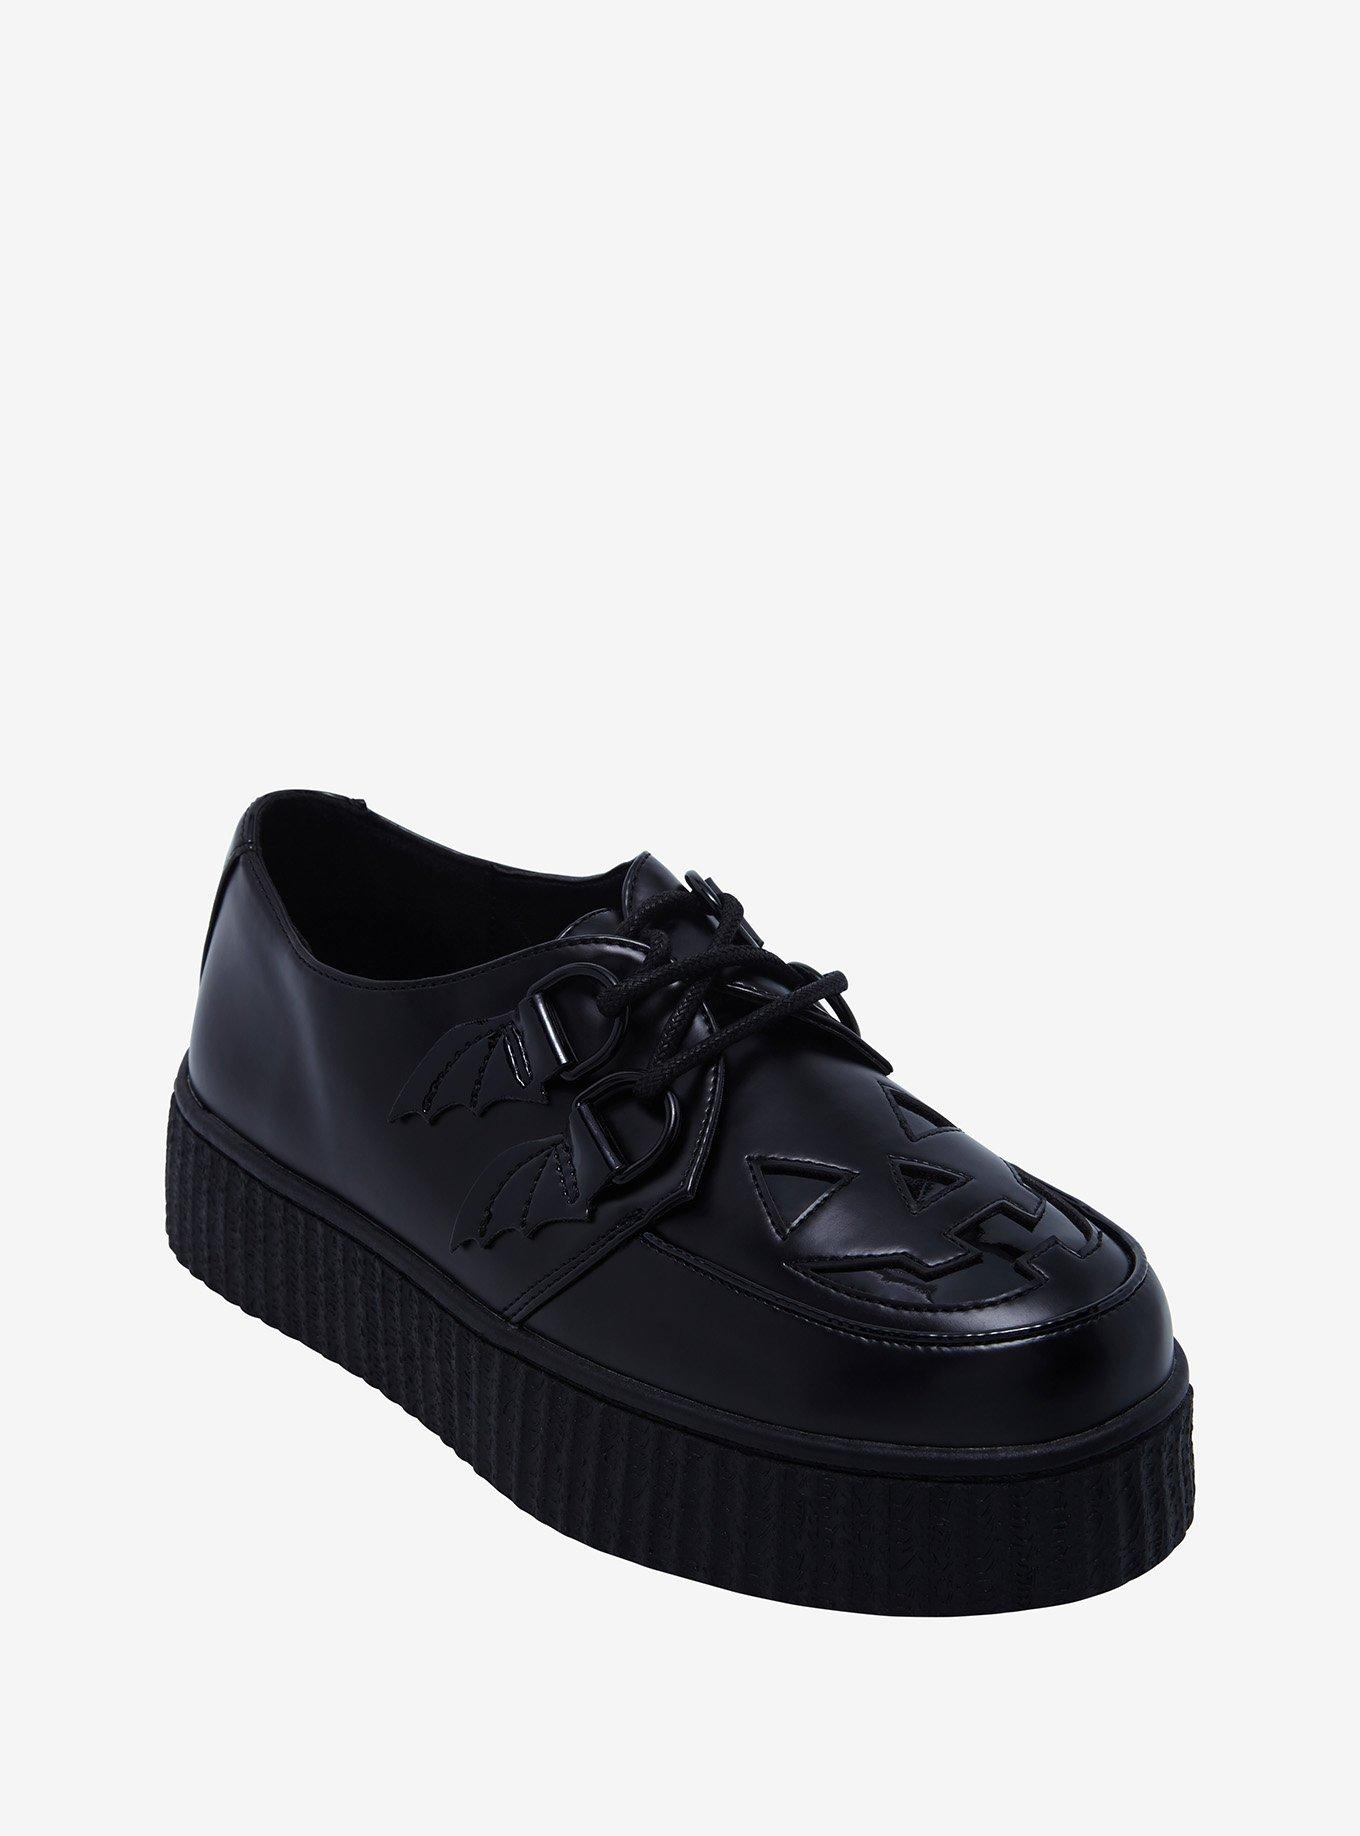 Creepers: Creeper Shoes & Plaform Creepers | Hot